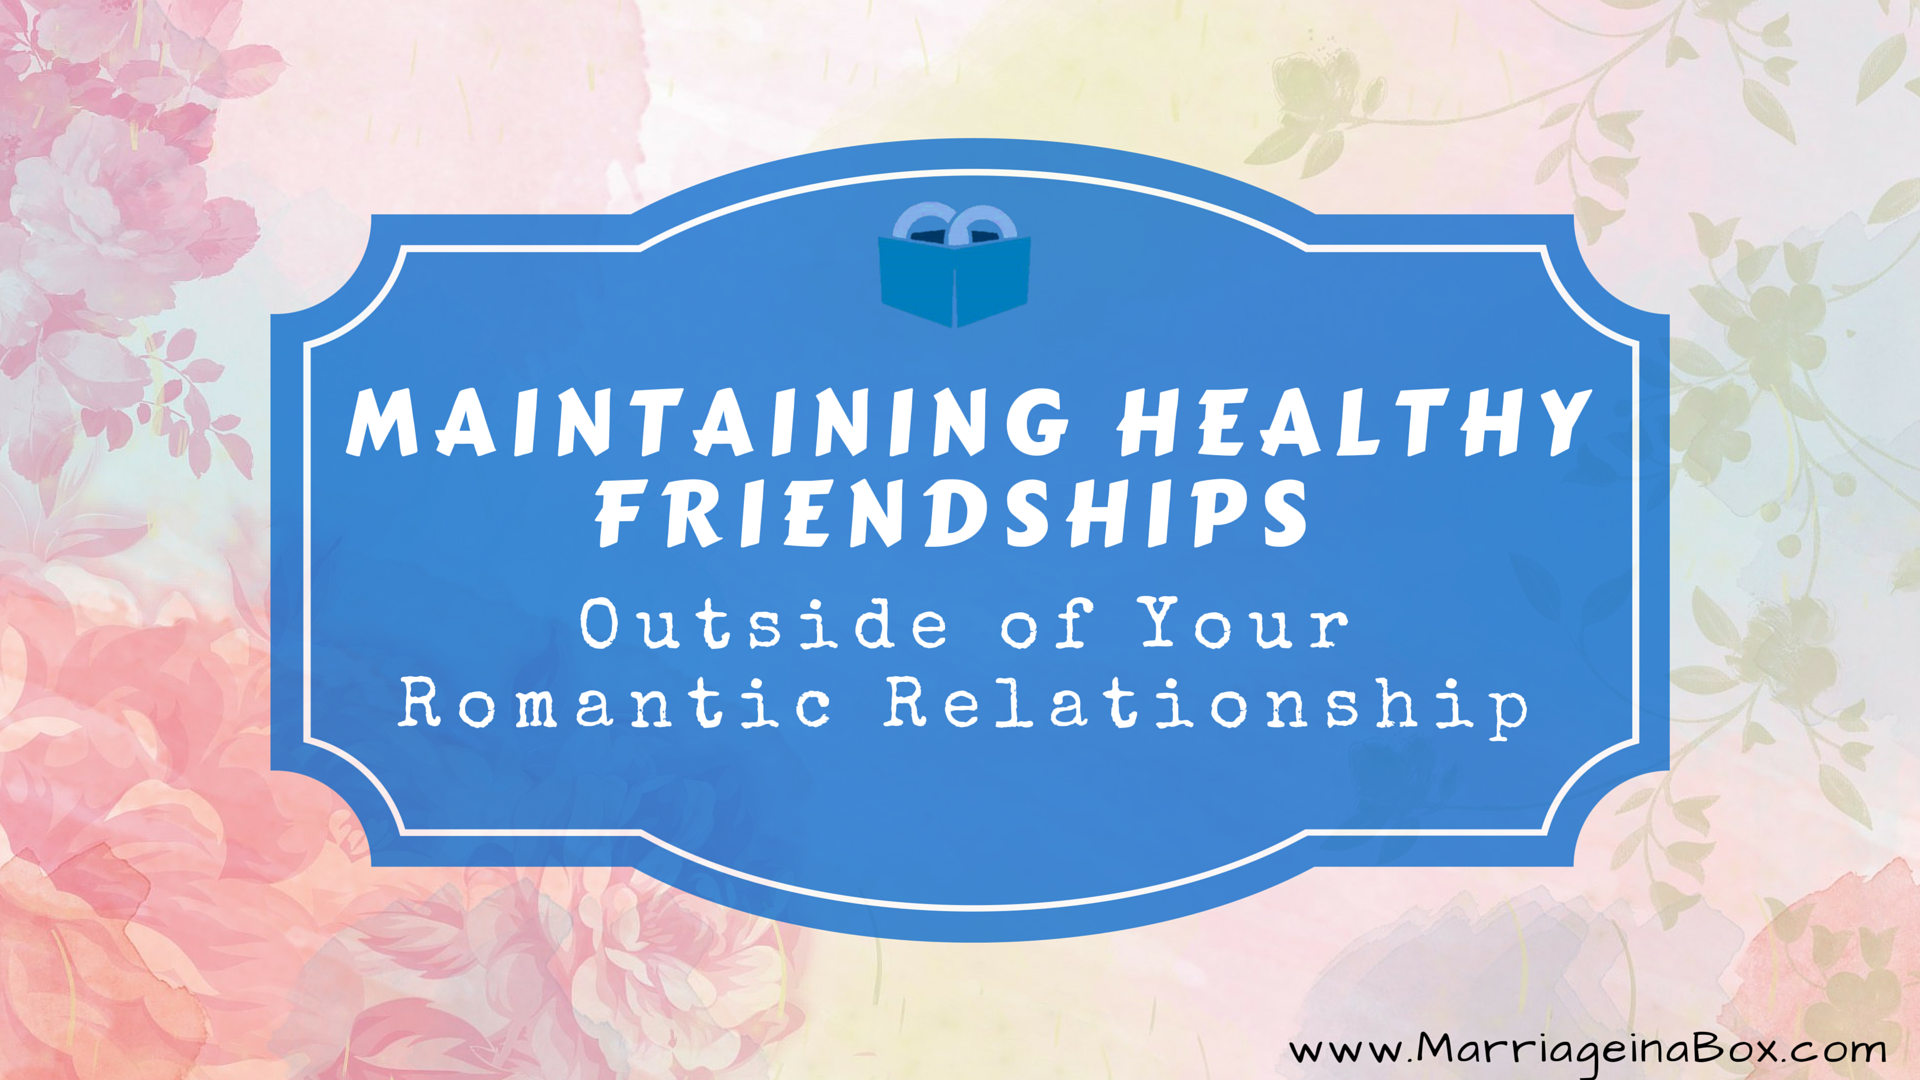 Maintaining Healthy Friendships Outside of Your Romantic Relationship